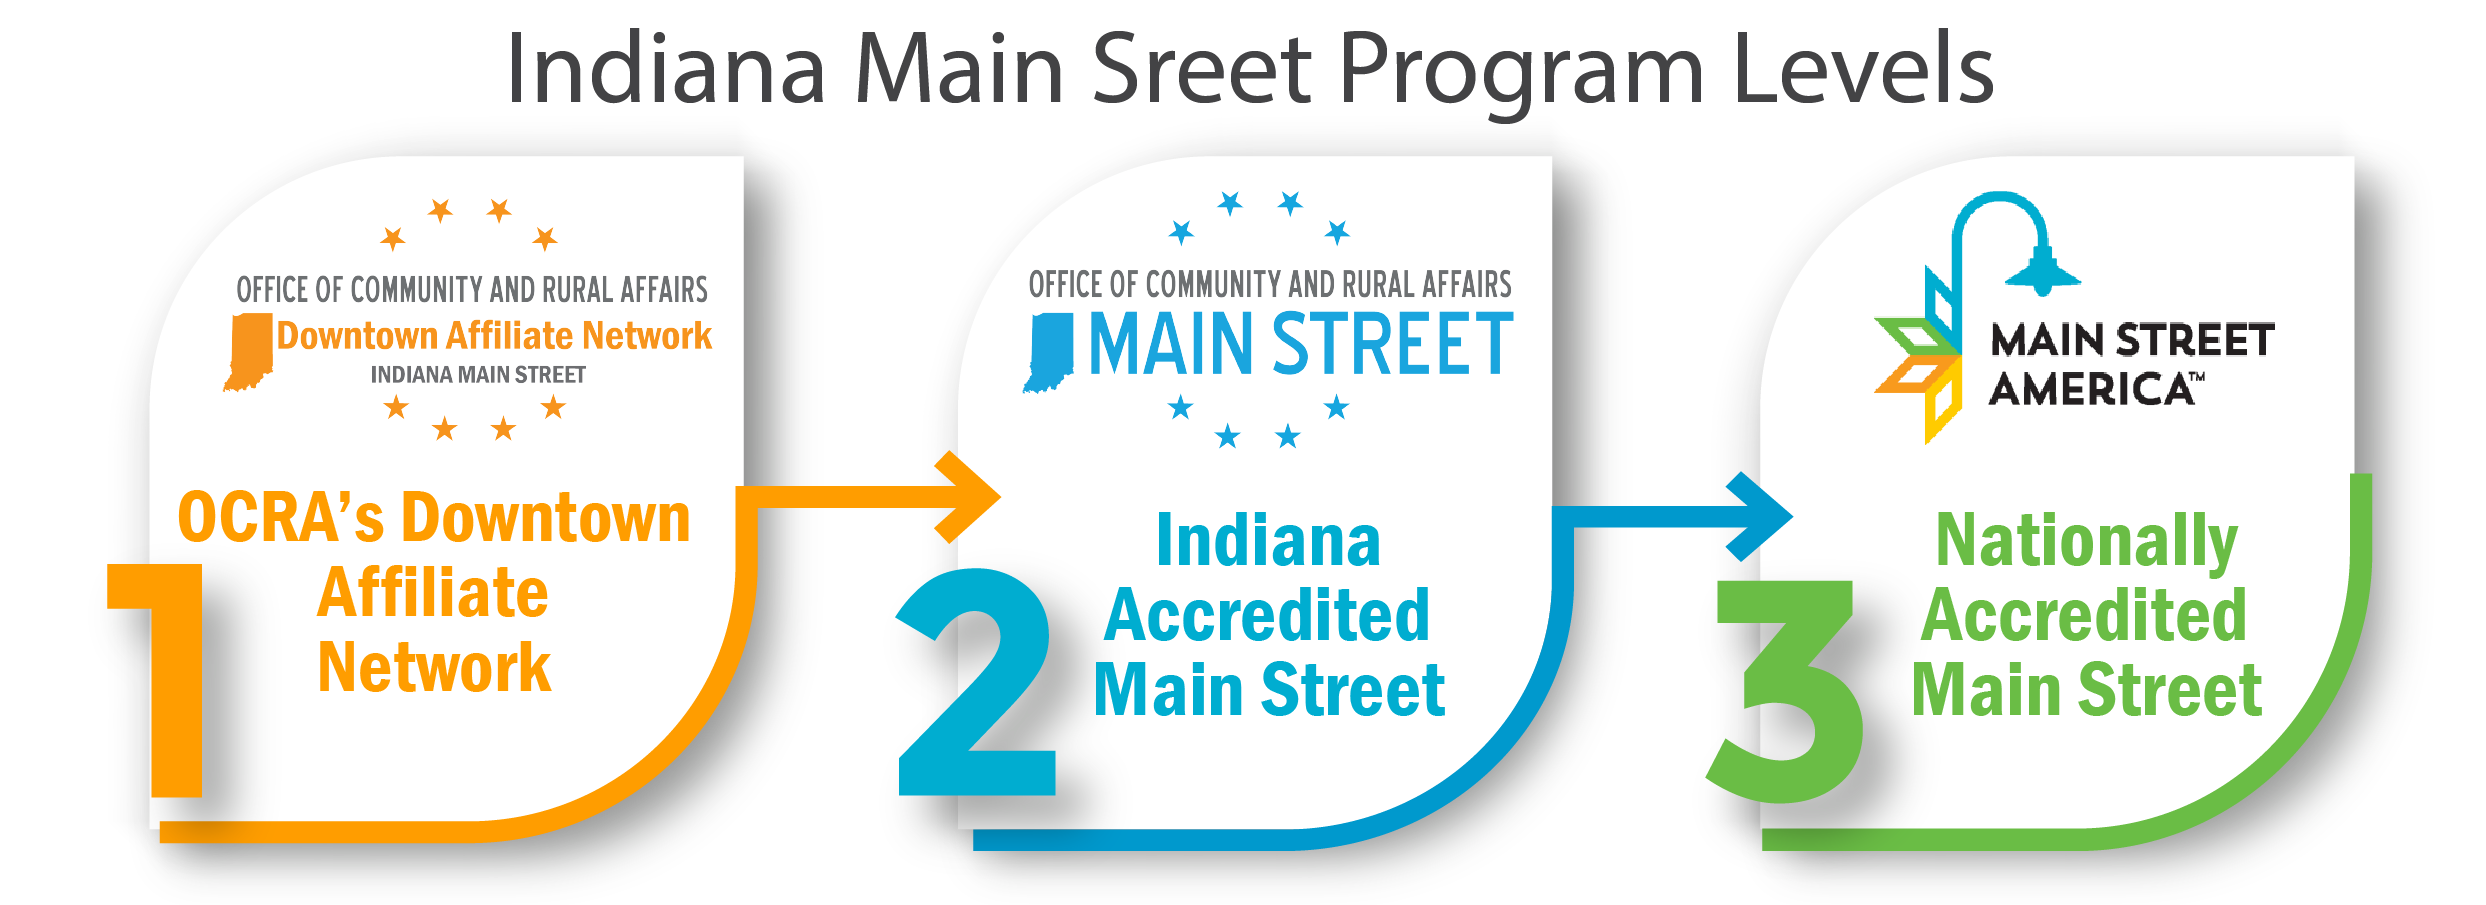 Indiana Main Street Levels graphic